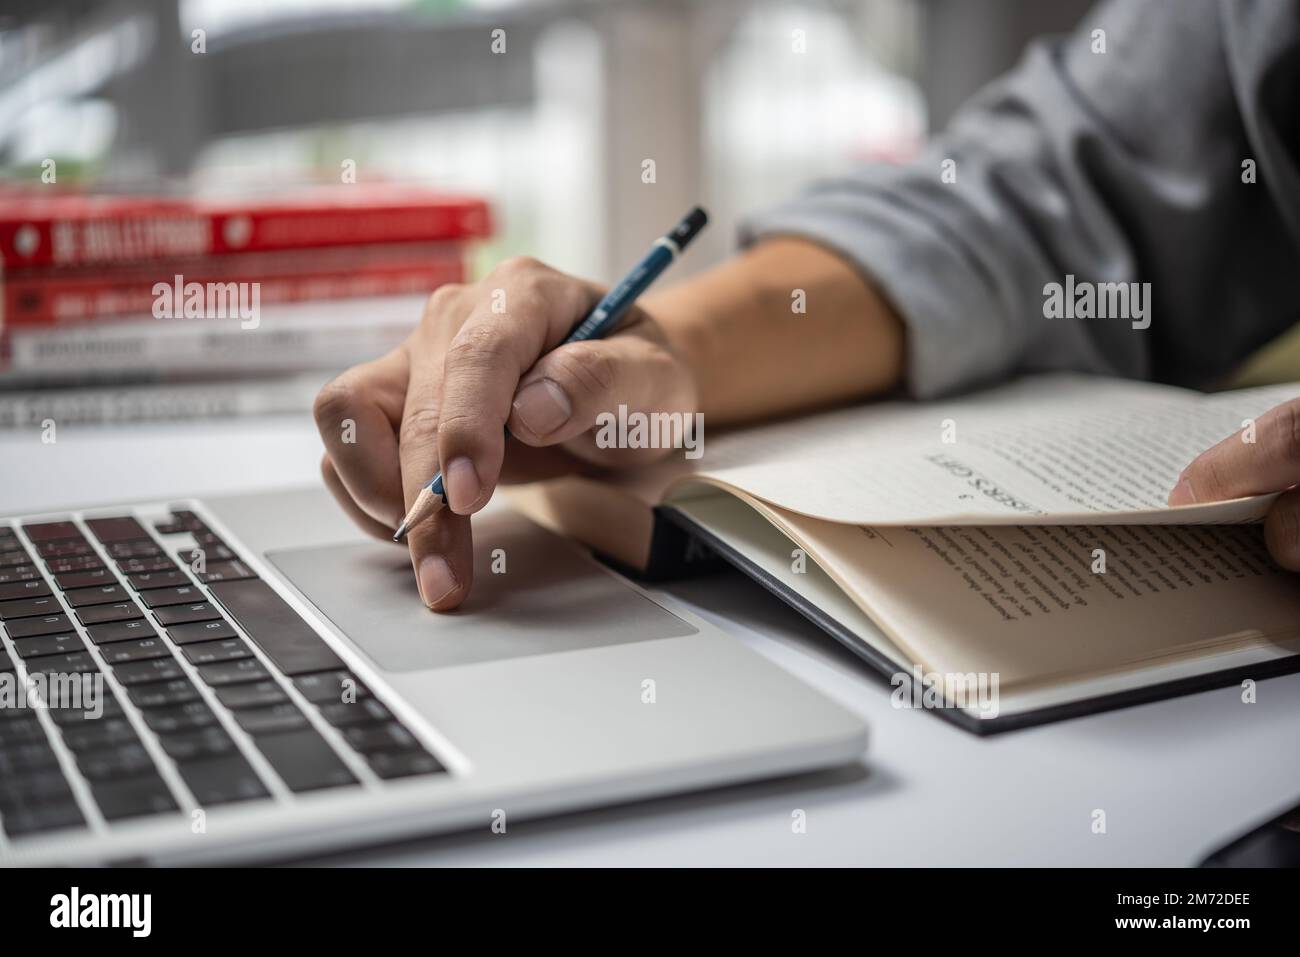 learning online class by using laptop computer and writing notebook at workplace, Education development or knowledge improvement concept. Stock Photo